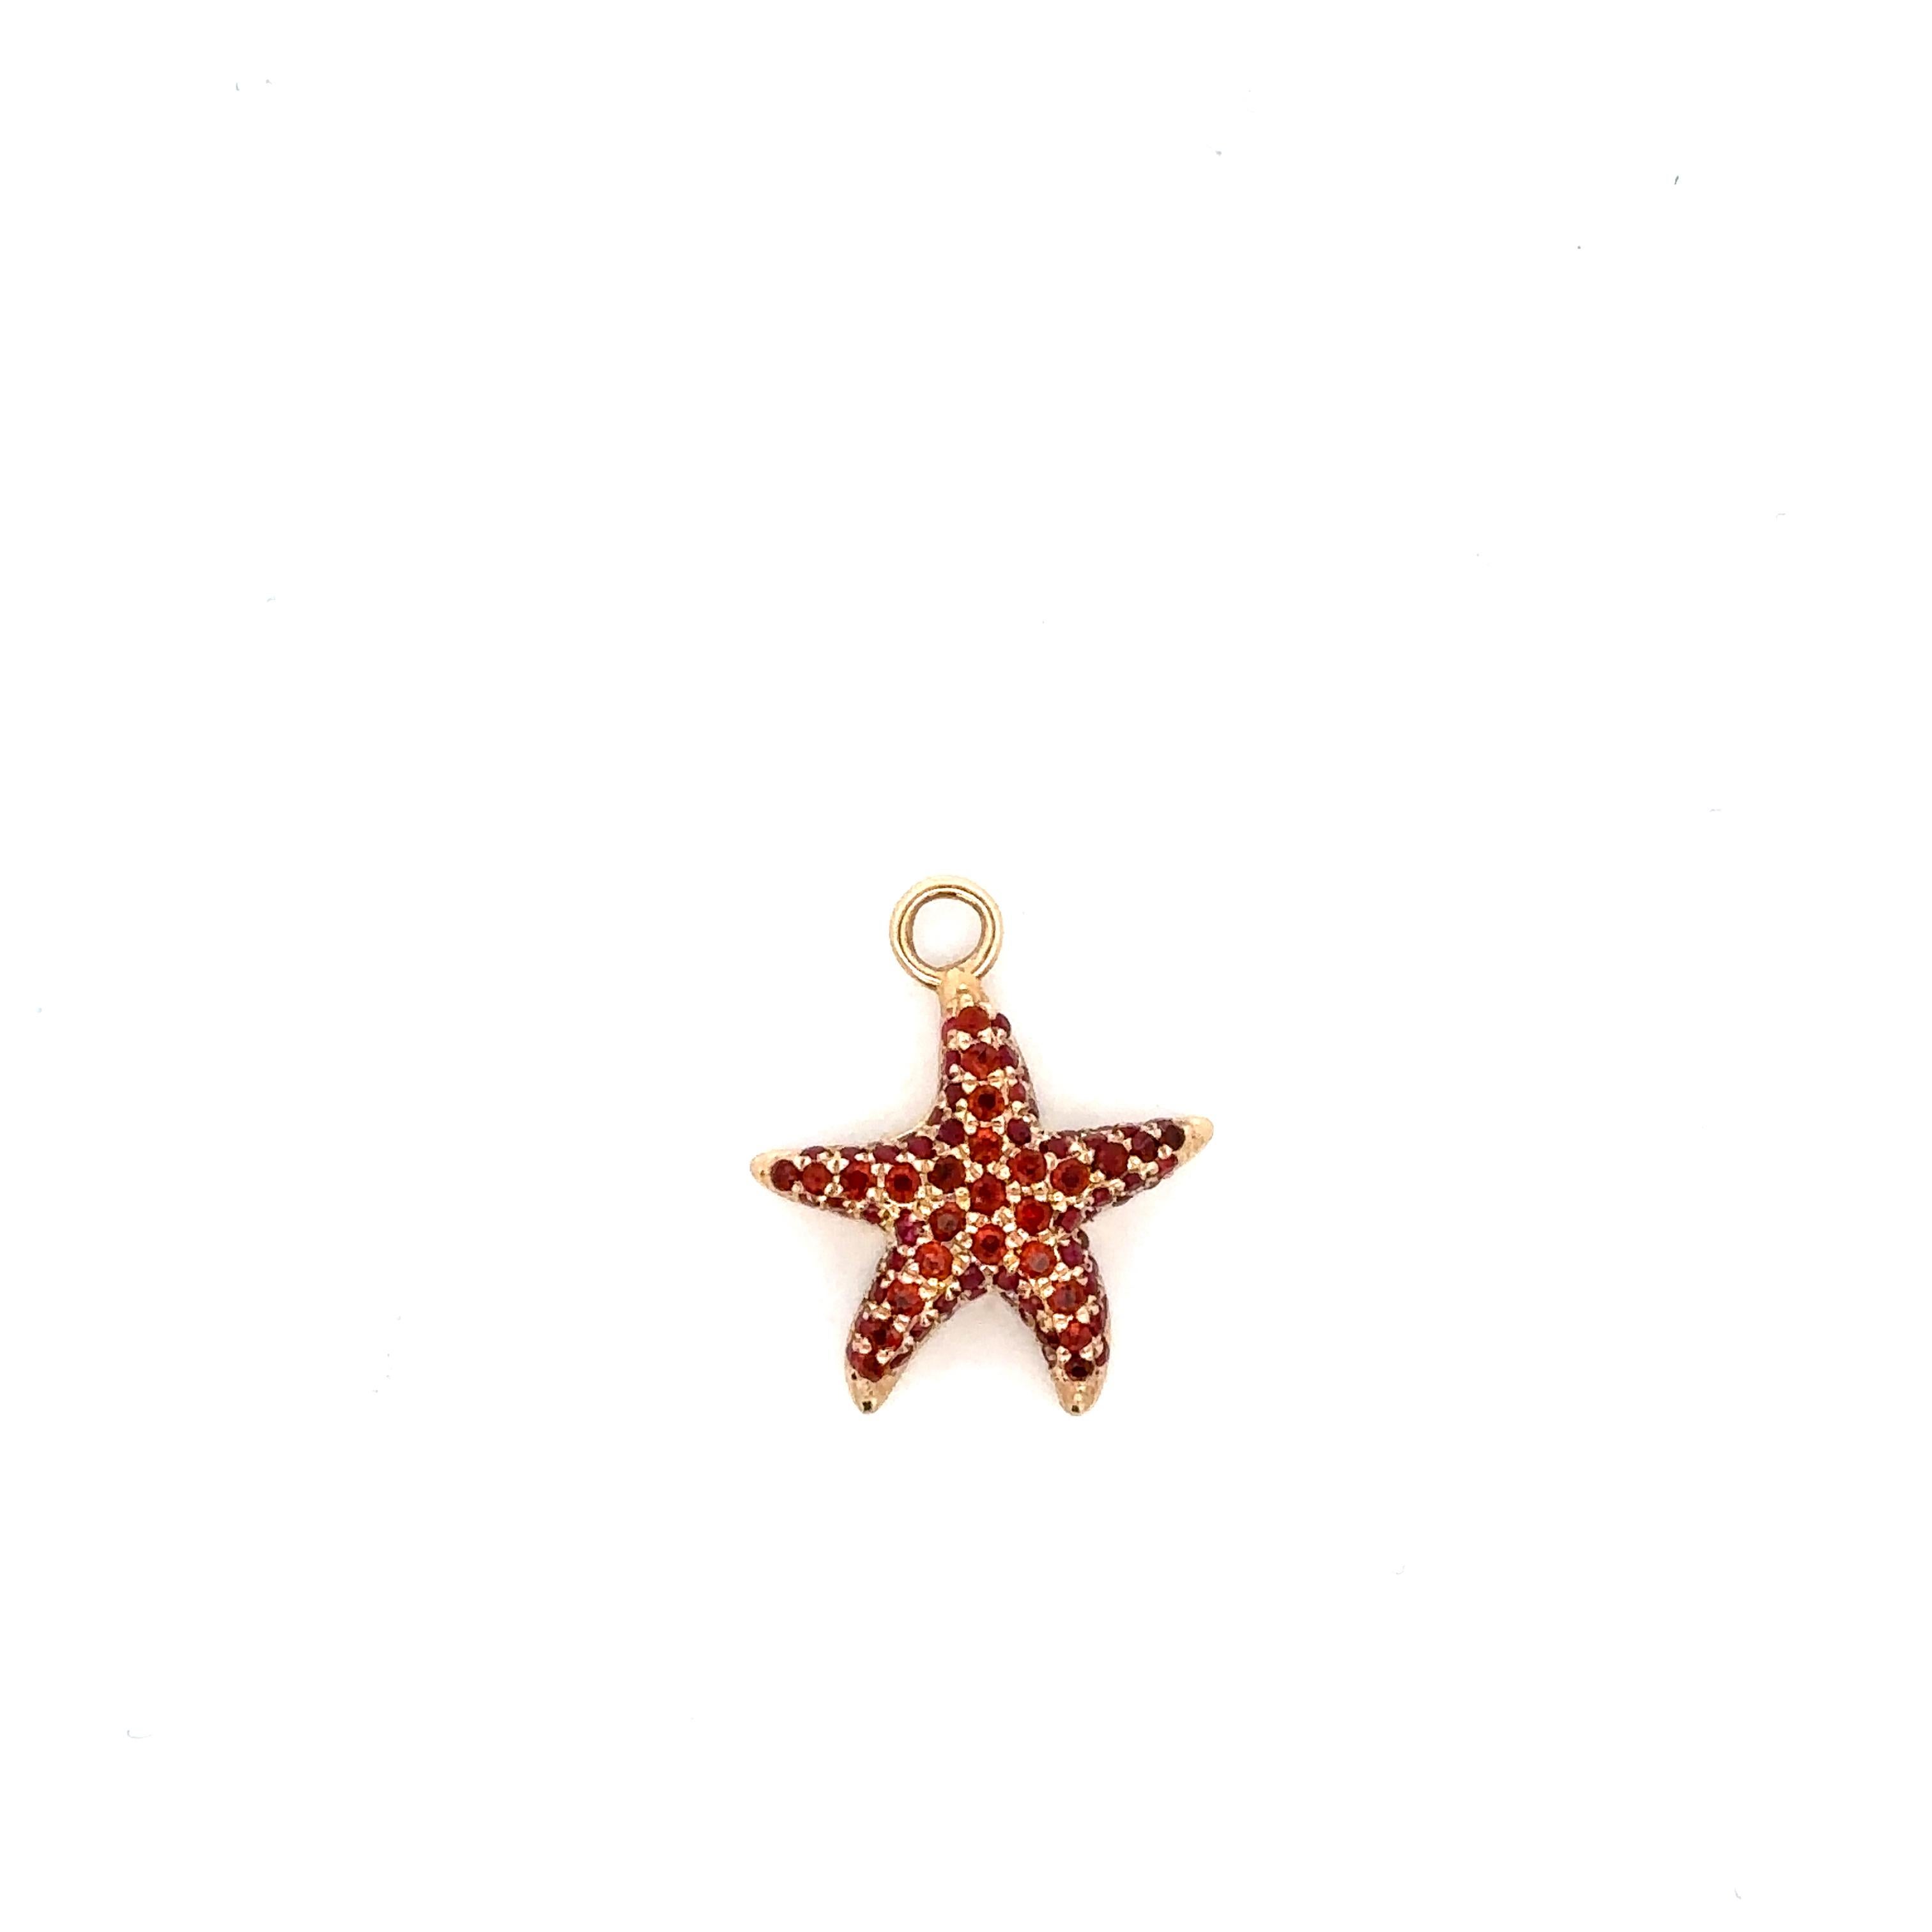 Adina Reyter One of a Kind Ruby and Garnet Starfish Charm - Y14

14K yellow gold hinged starfish charm with hand-set pavé rubies and garnets. Charm measures approximately 14 mm x 14 mm. Wear it with your favorite necklace and add more charms!

Total